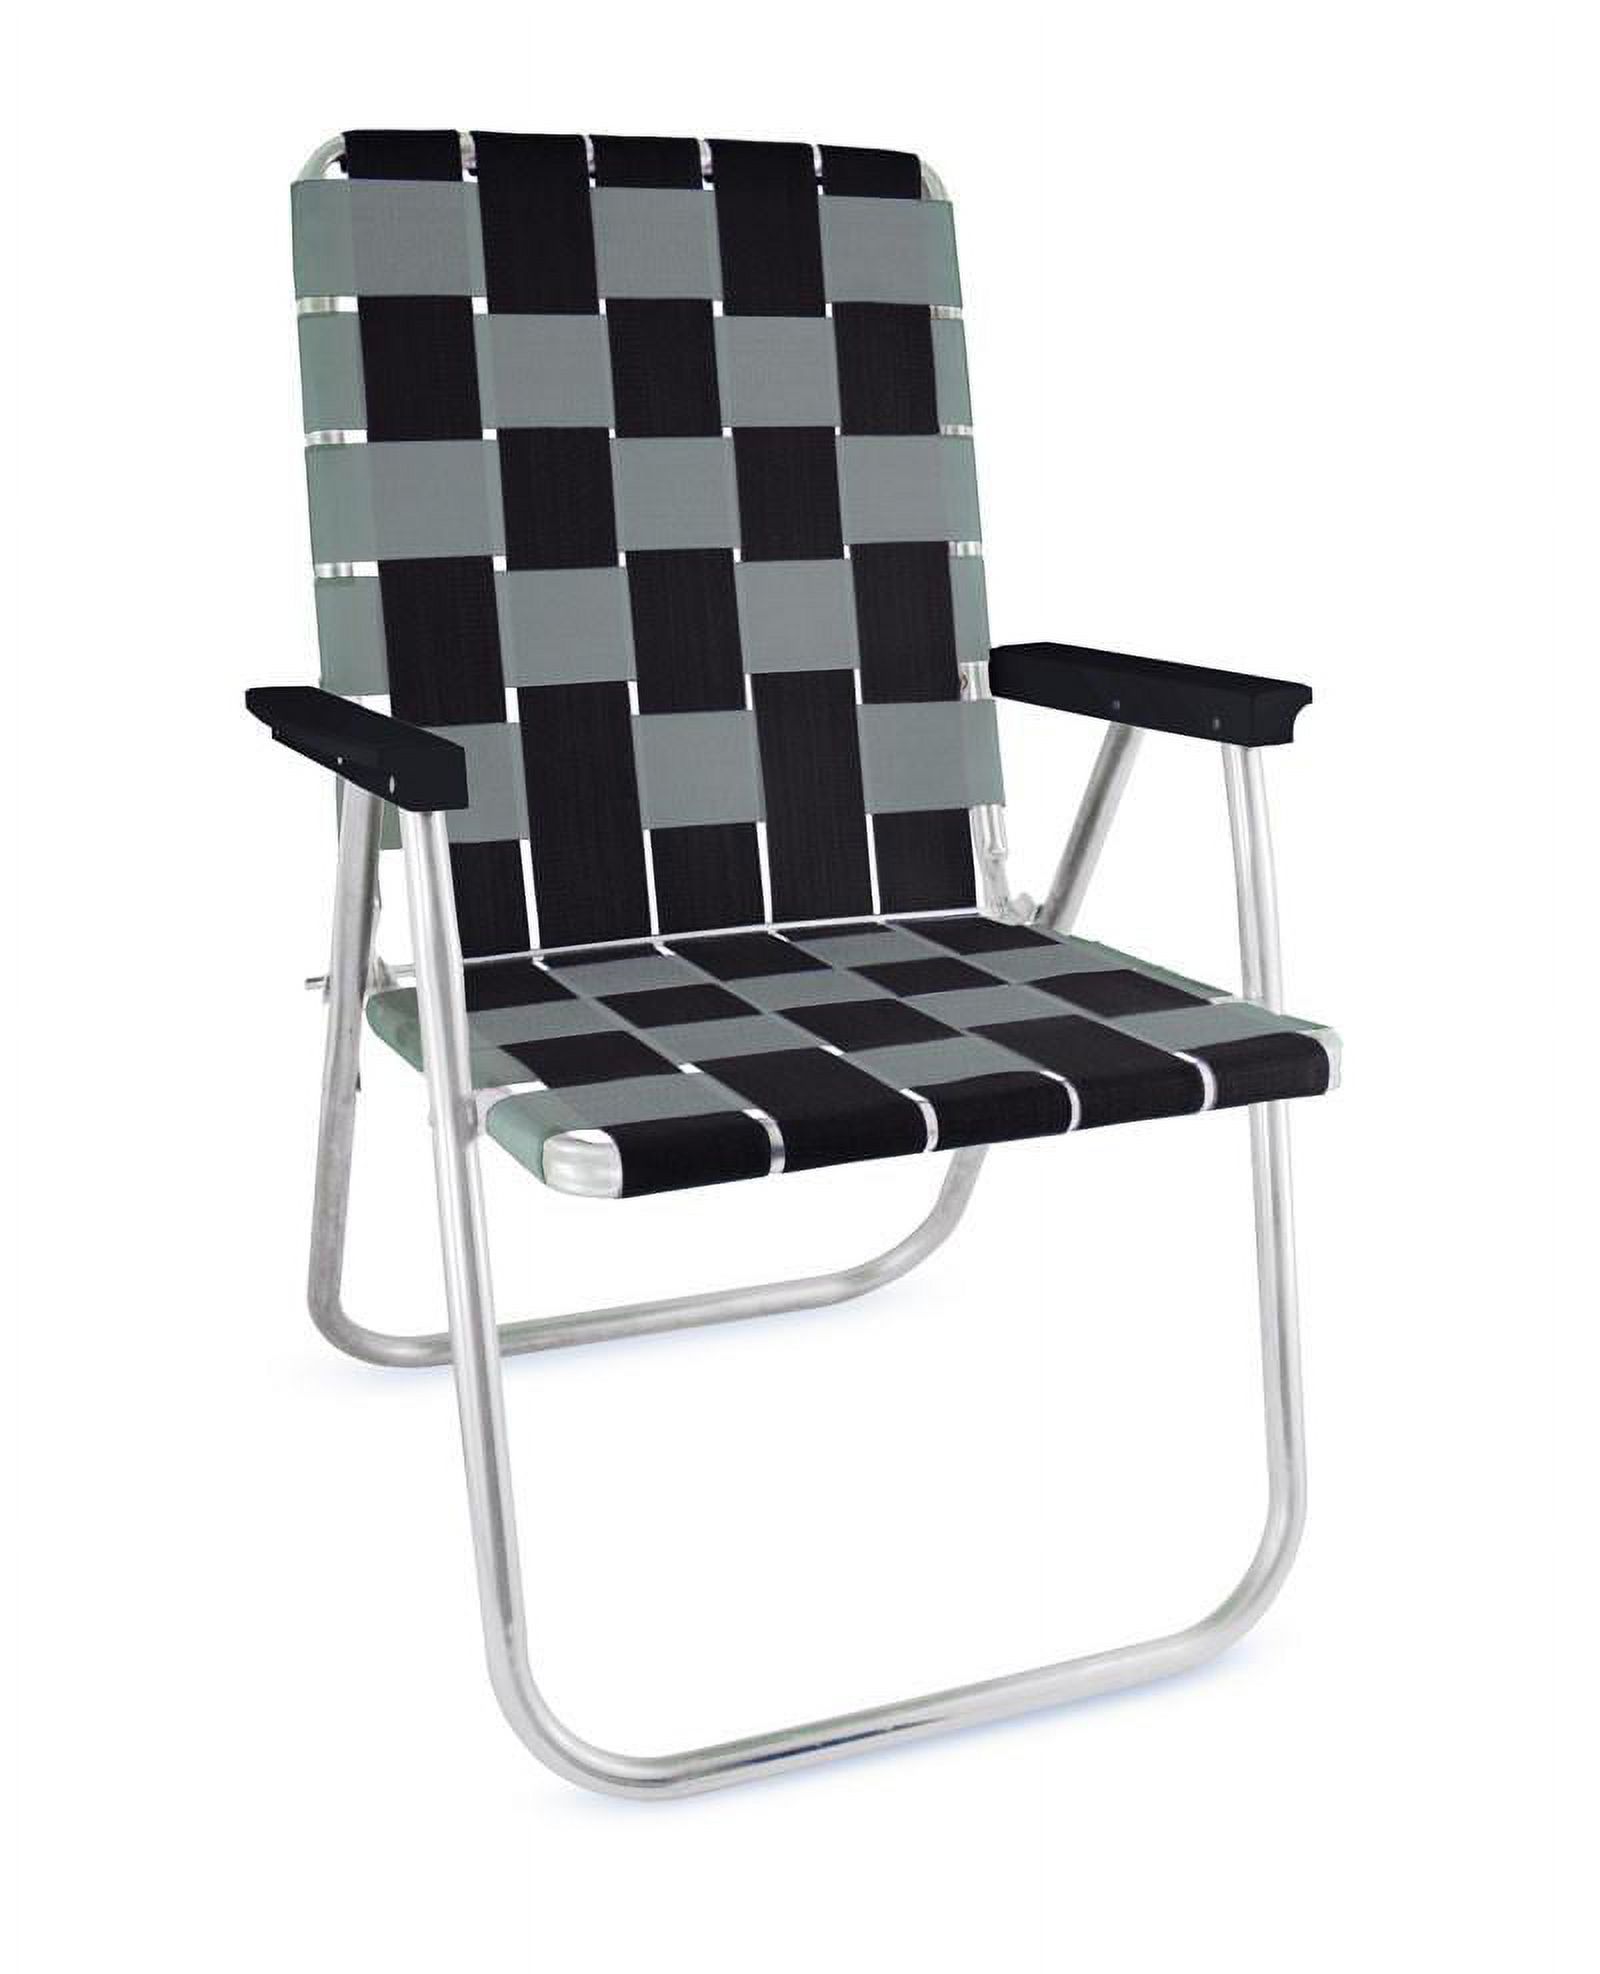 Lawn Chair USA - Classic Folding Aluminum Webbed Chair - Durable, Portable, and Comfortable Outdoor Chair - Ideal for Camping, Sports, and Concerts - Black and Silver with White arms - image 1 of 7